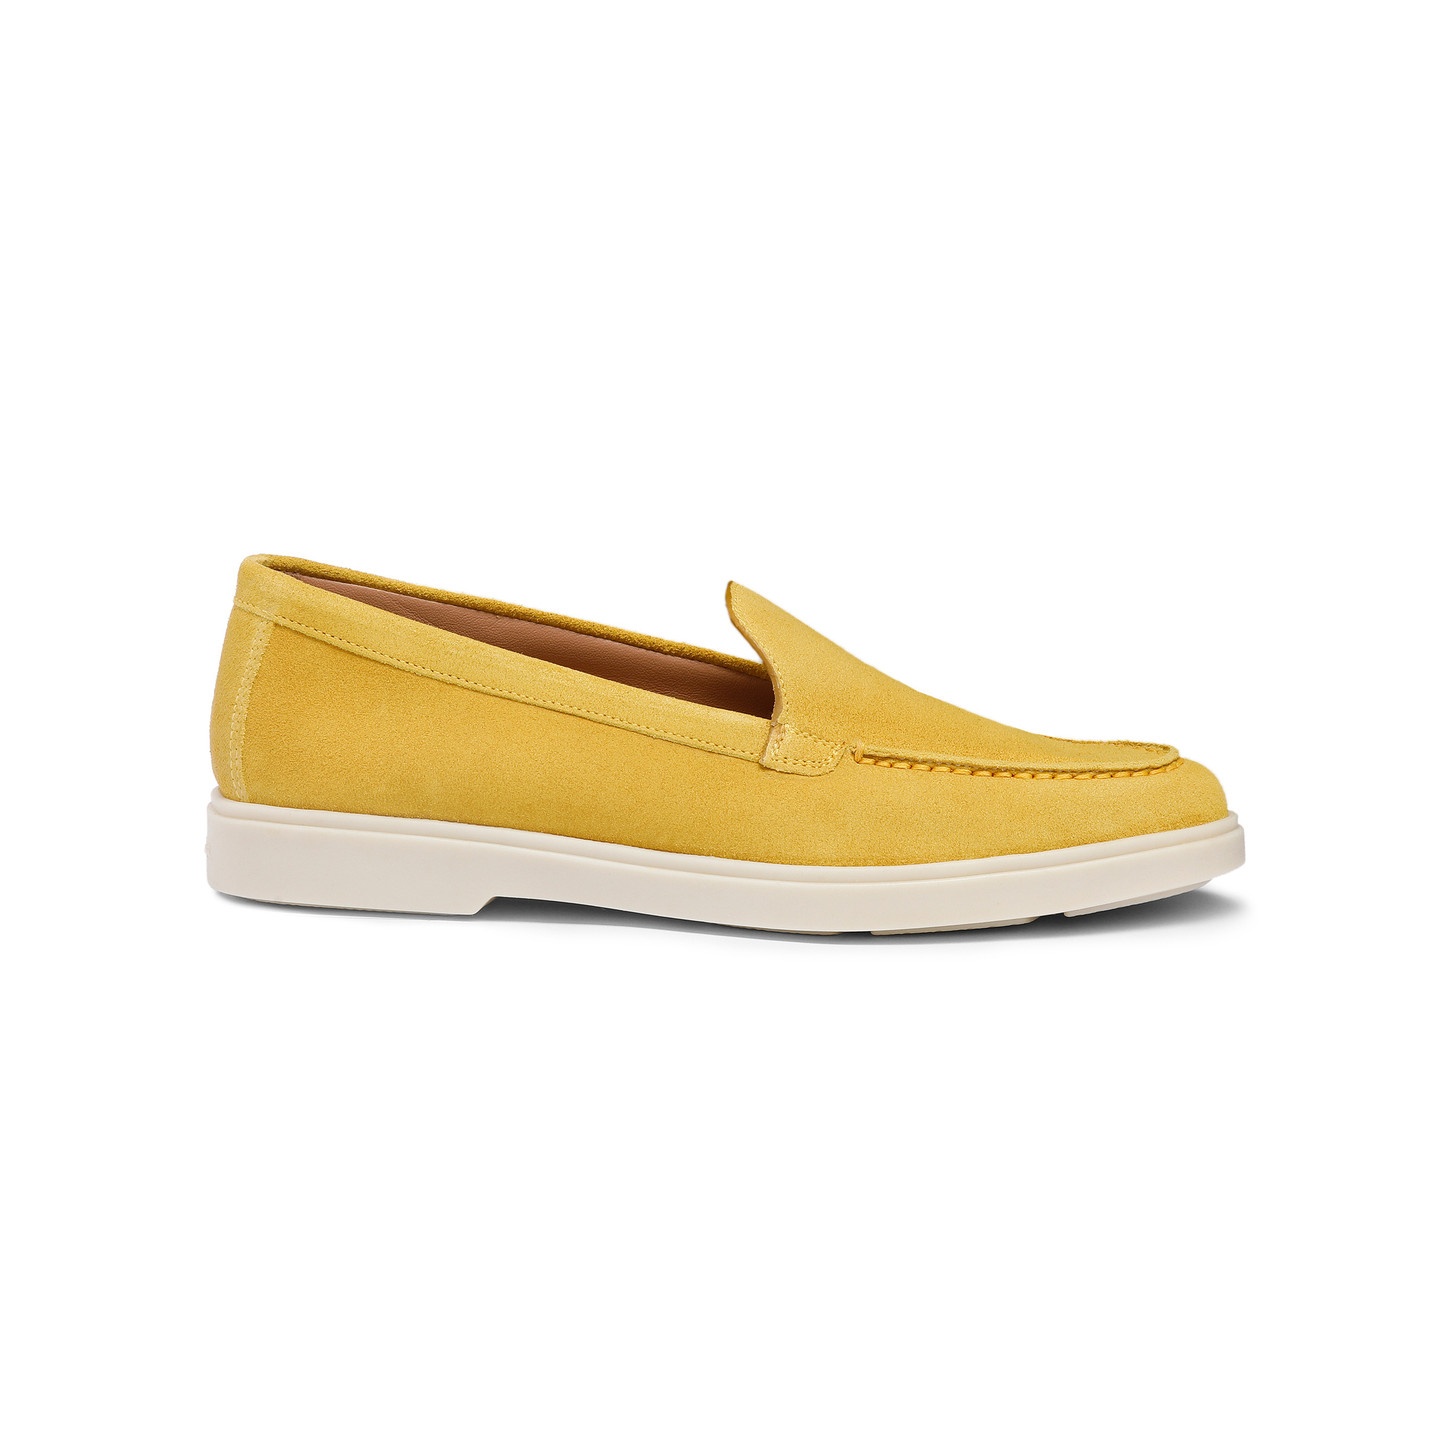 Women's yellow suede loafer - 1